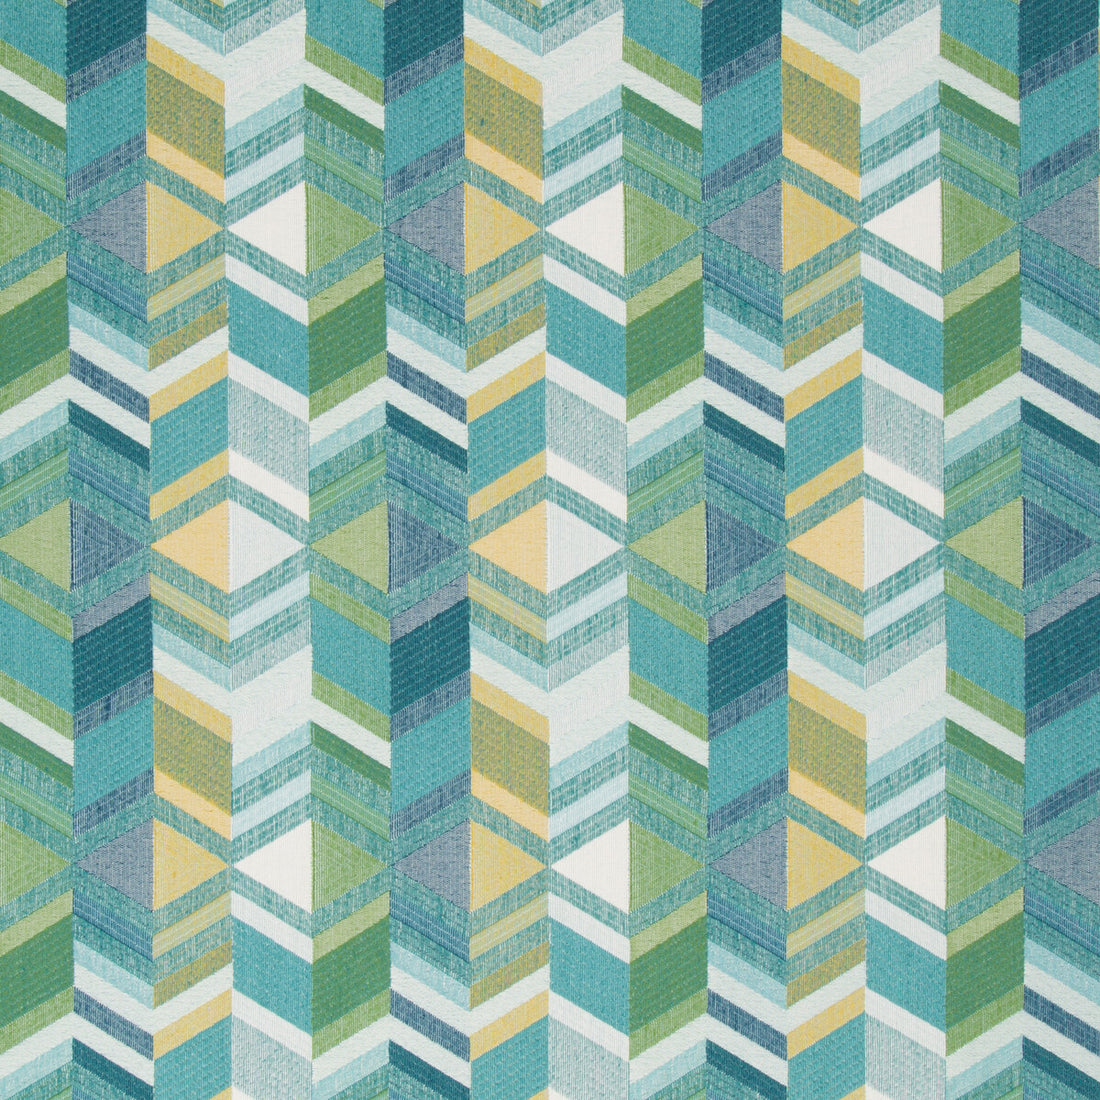 Kravet Contract fabric in 35051-413 color - pattern 35051.413.0 - by Kravet Contract in the Incase Crypton Gis collection